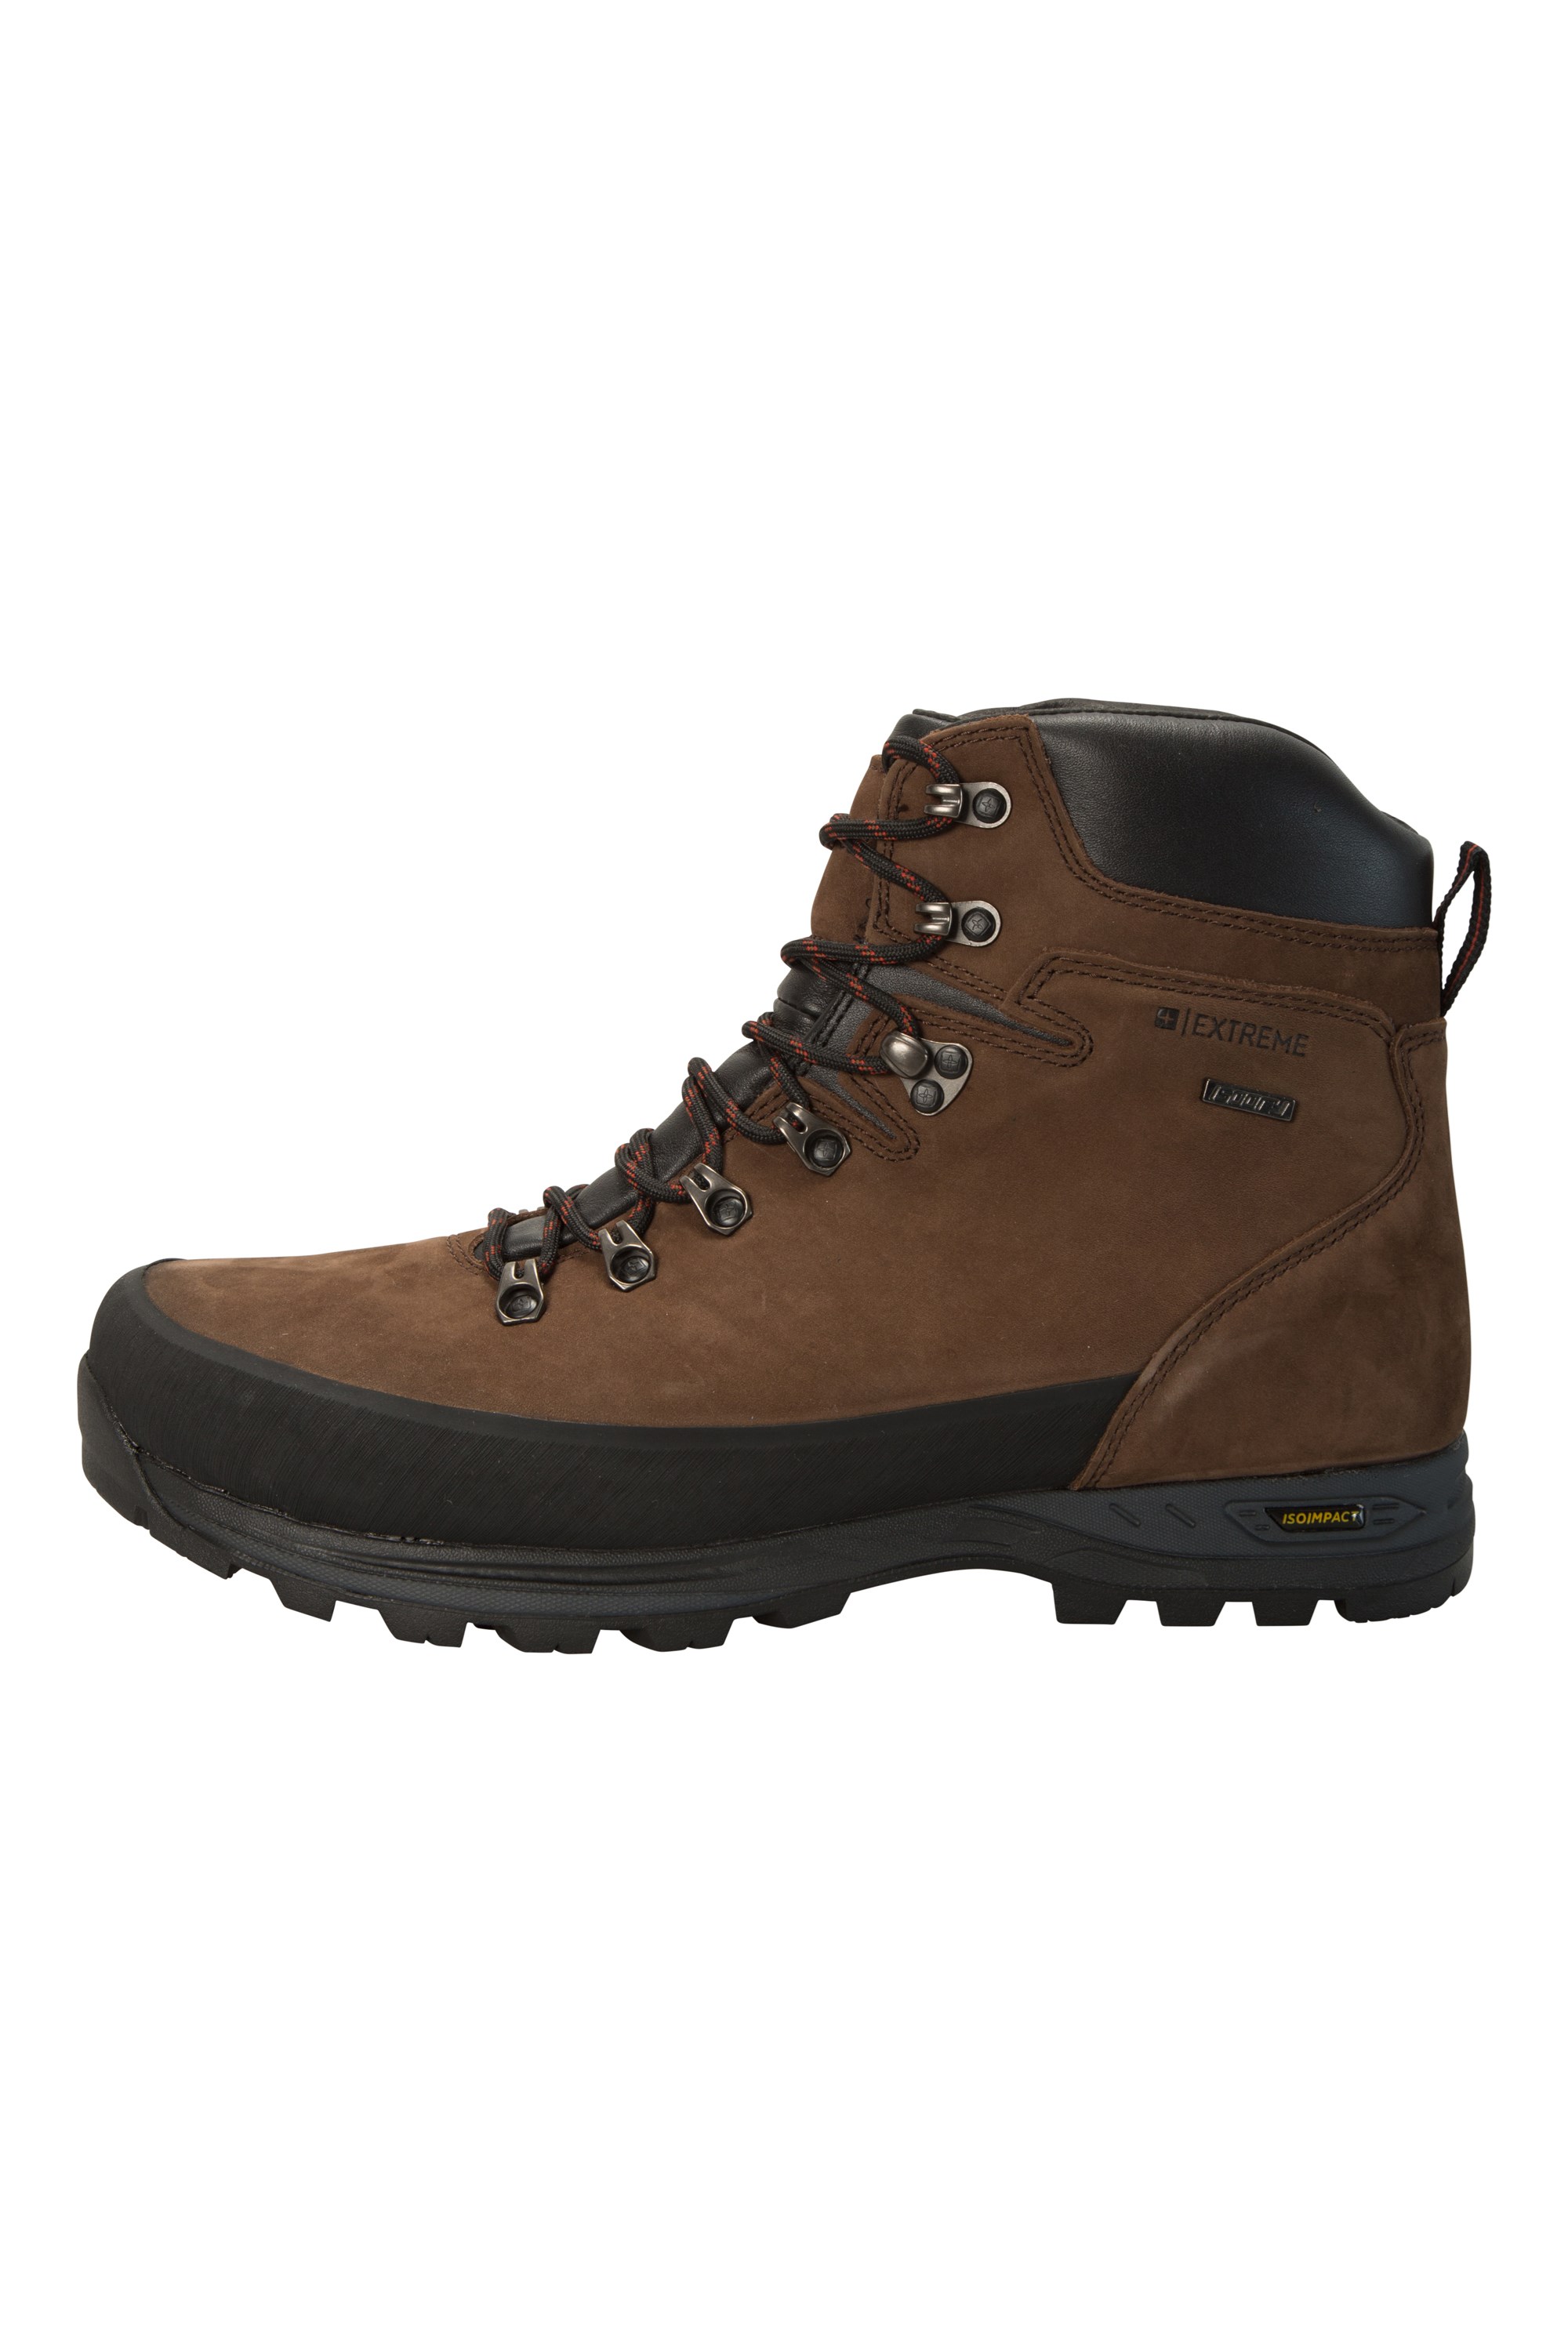 mountain warehouse isodry boots